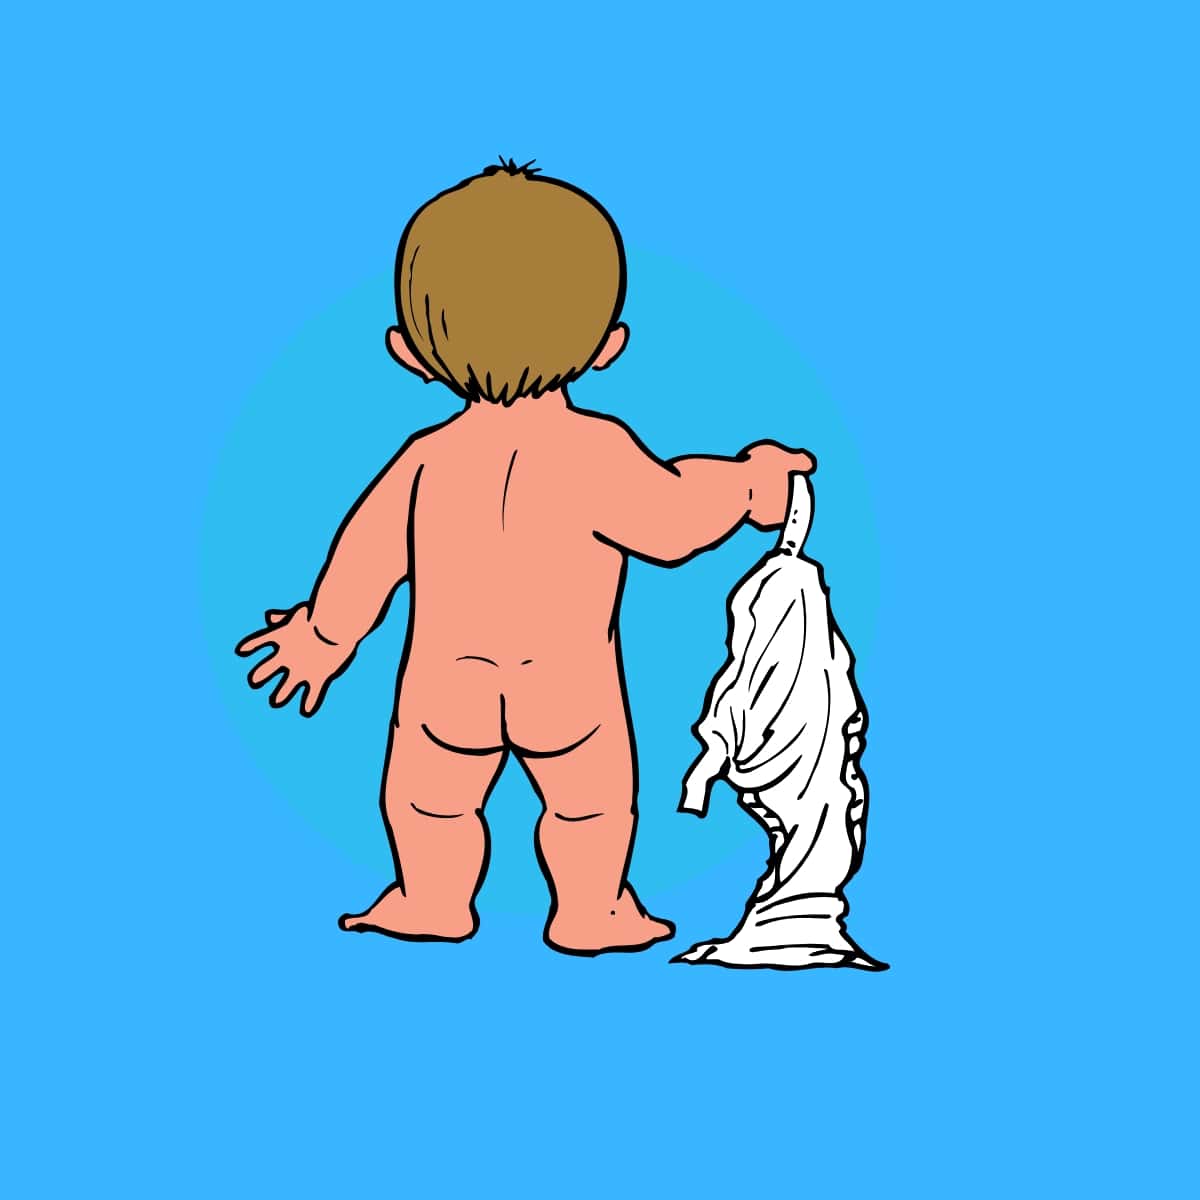 Cartoon graphic of a toddler holding his nappy and walking away while naked on a blue background.